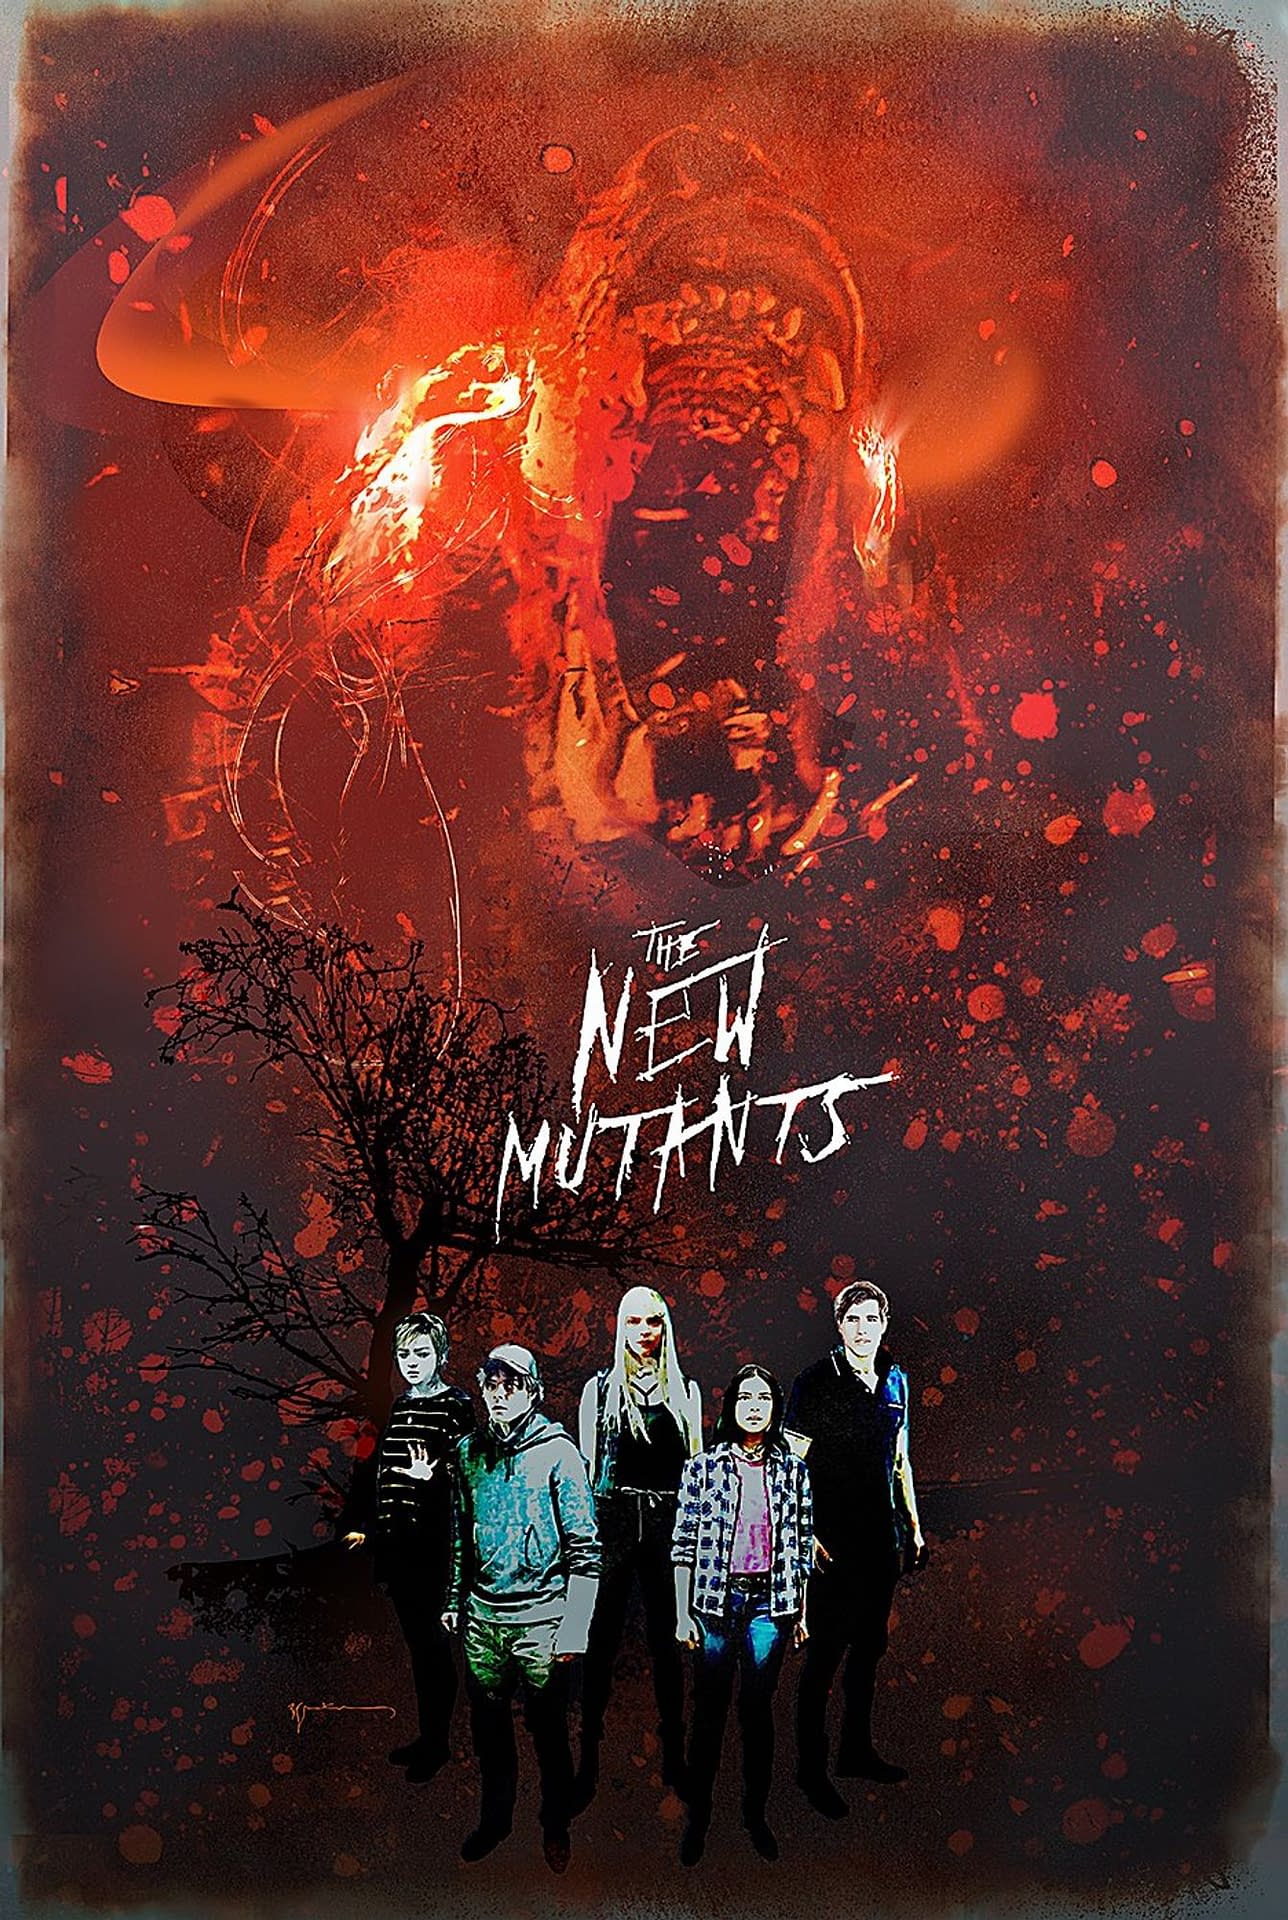 The New Mutants' Director Josh Boone Says The Film Never Had Reshoots, Marvel